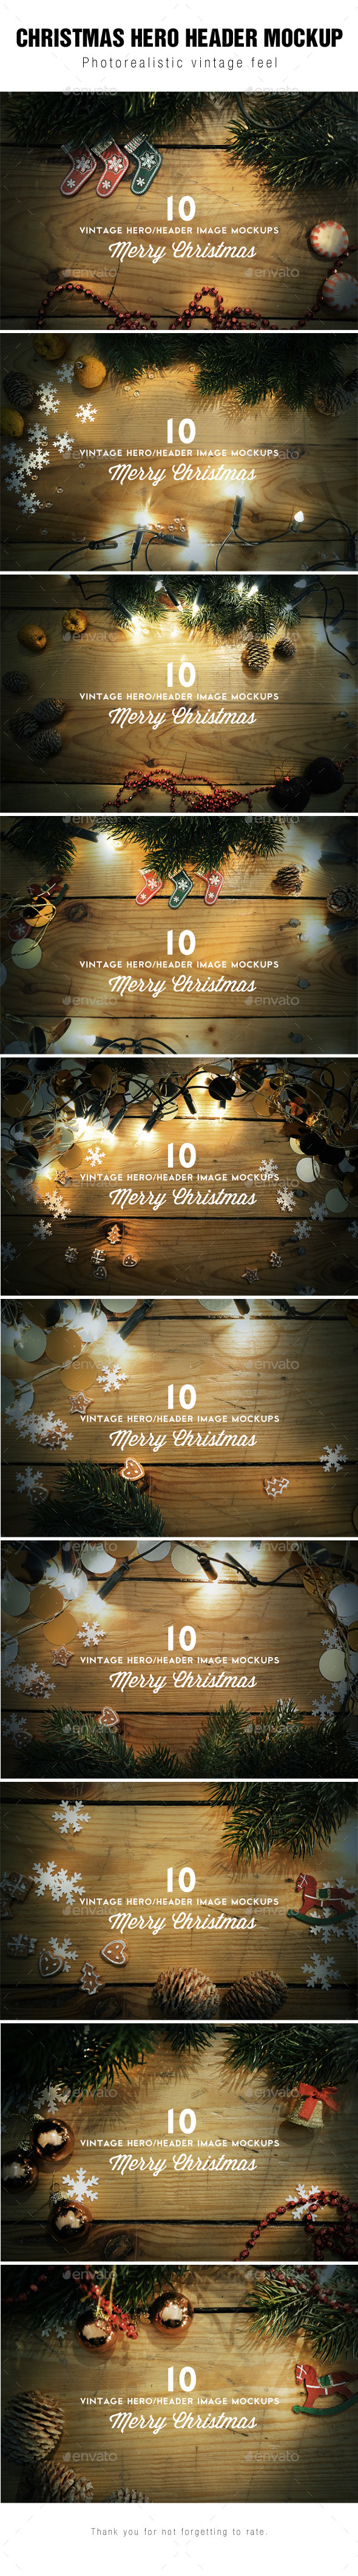 Download Christmas Hero Header Images Mockup By Amris Graphicriver